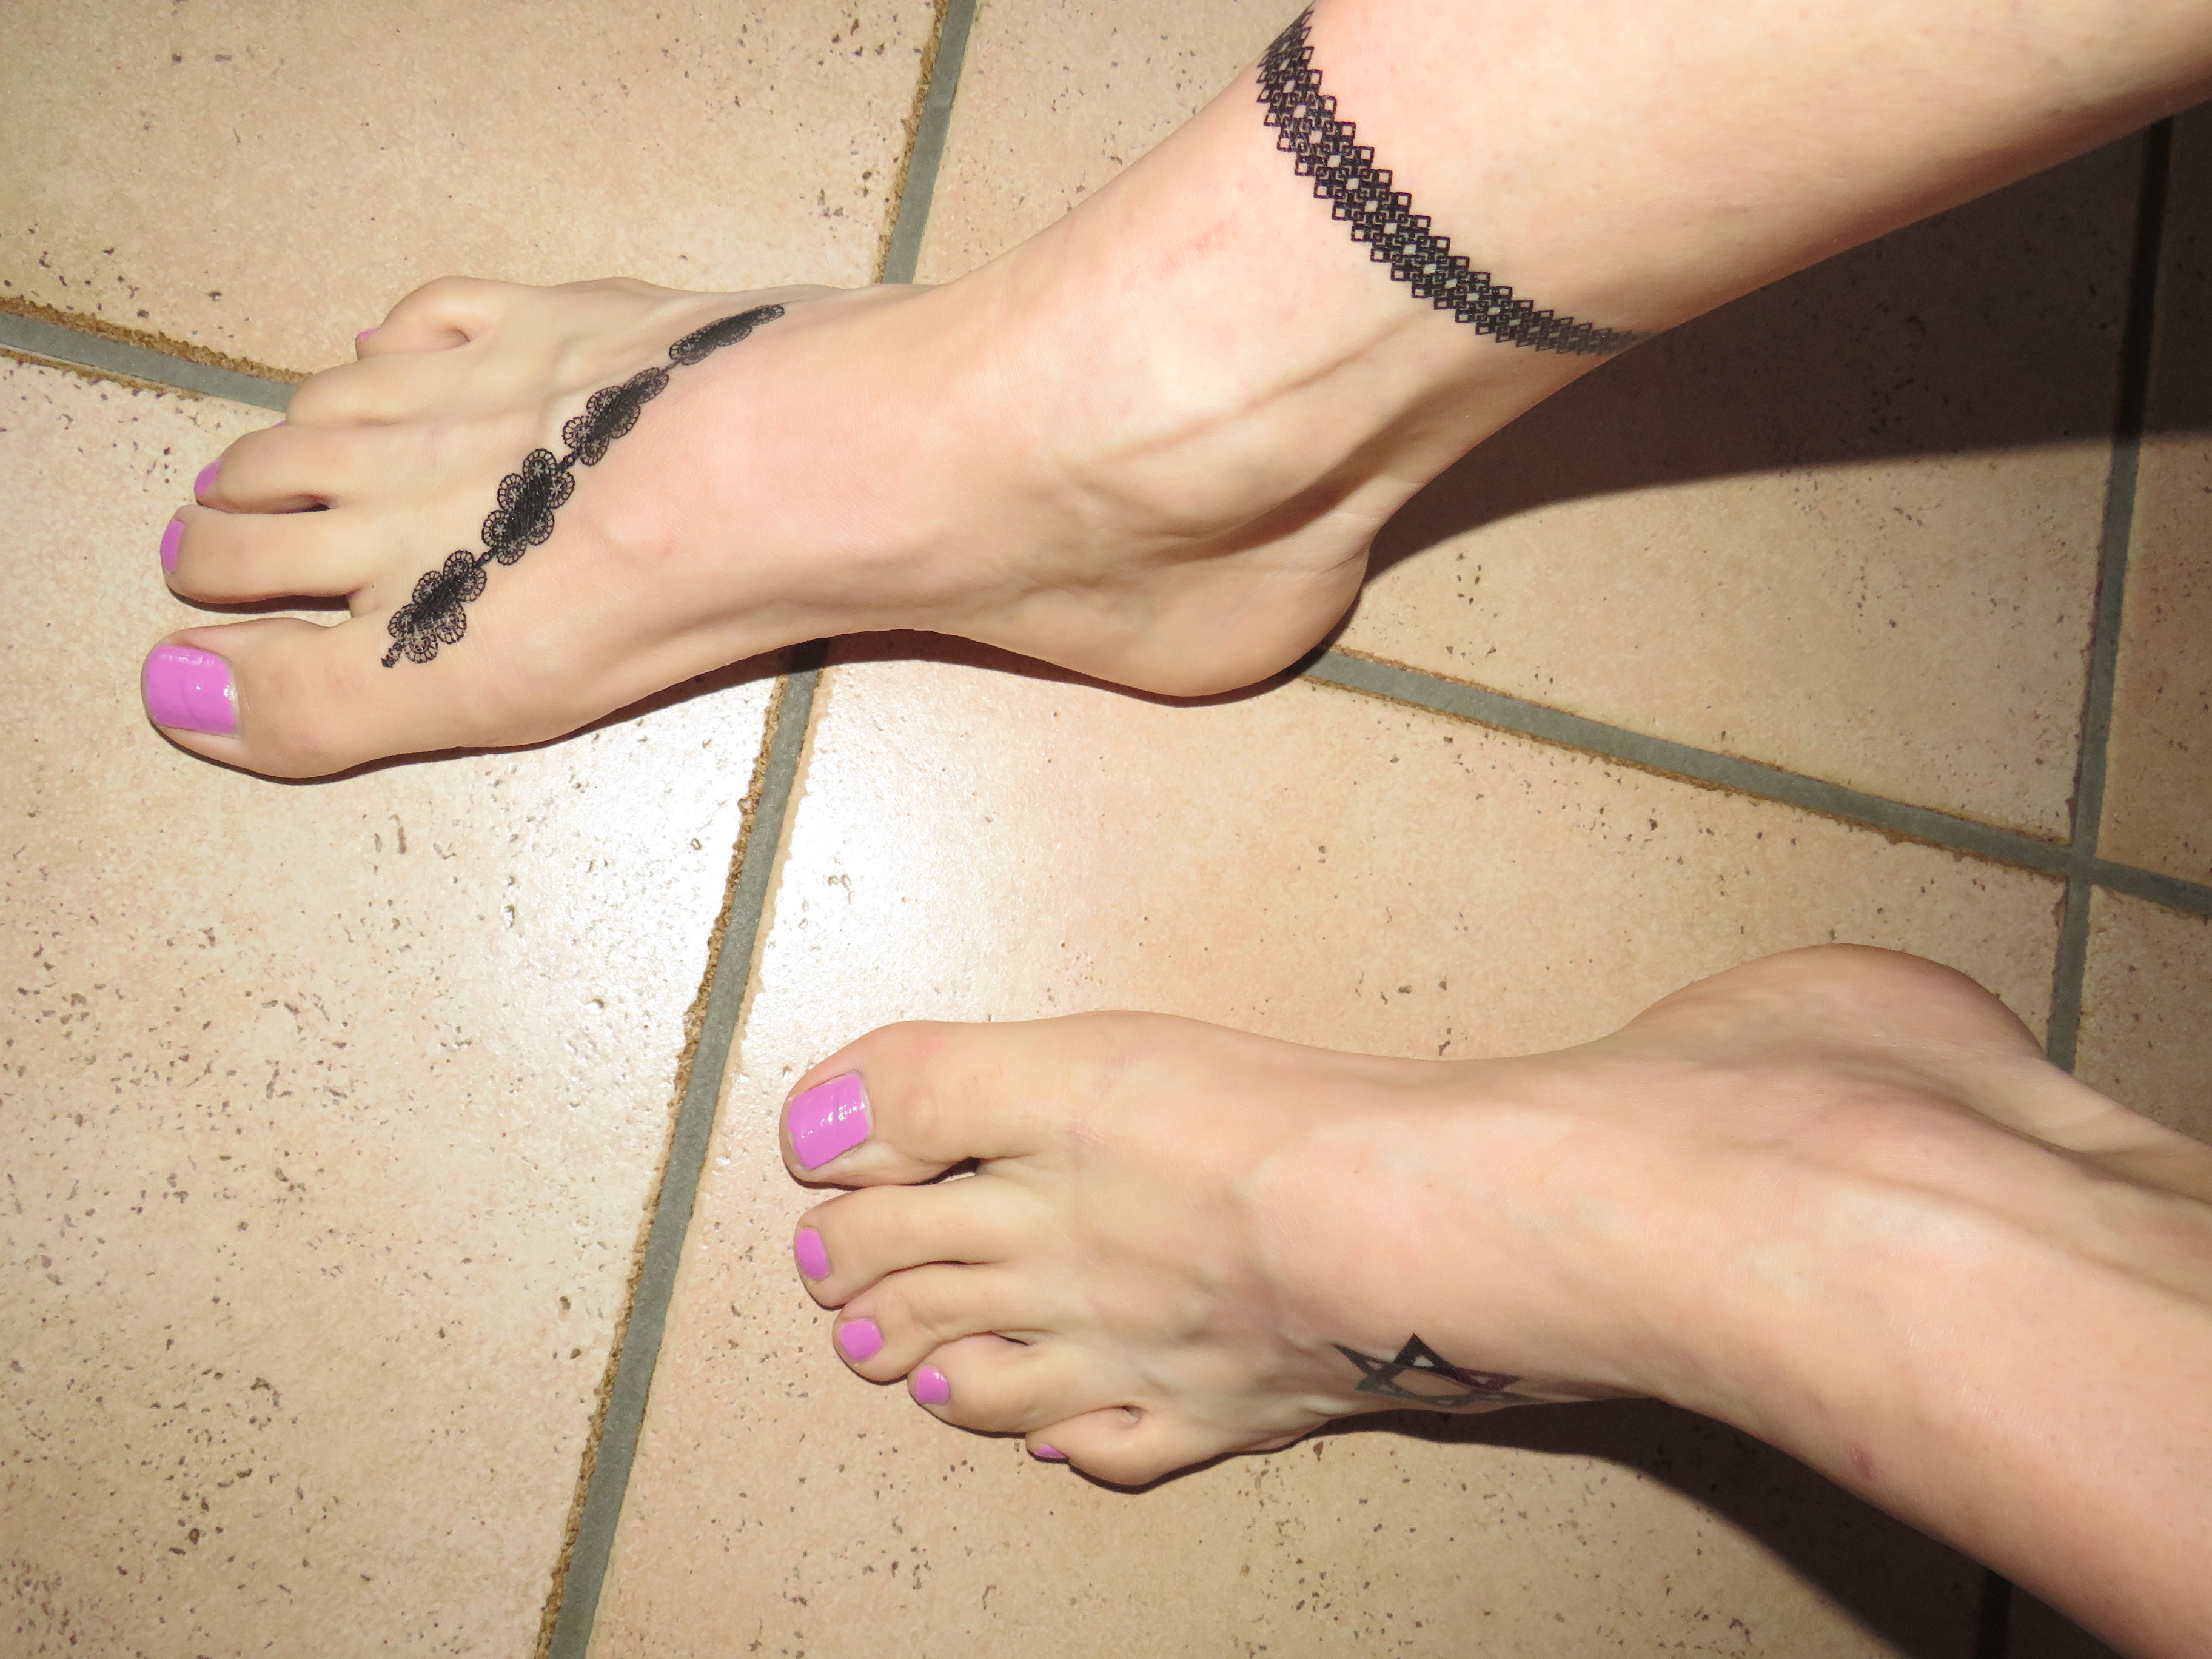 Women Feet Anklet Toes Closeup Pink Nails 3648x2736